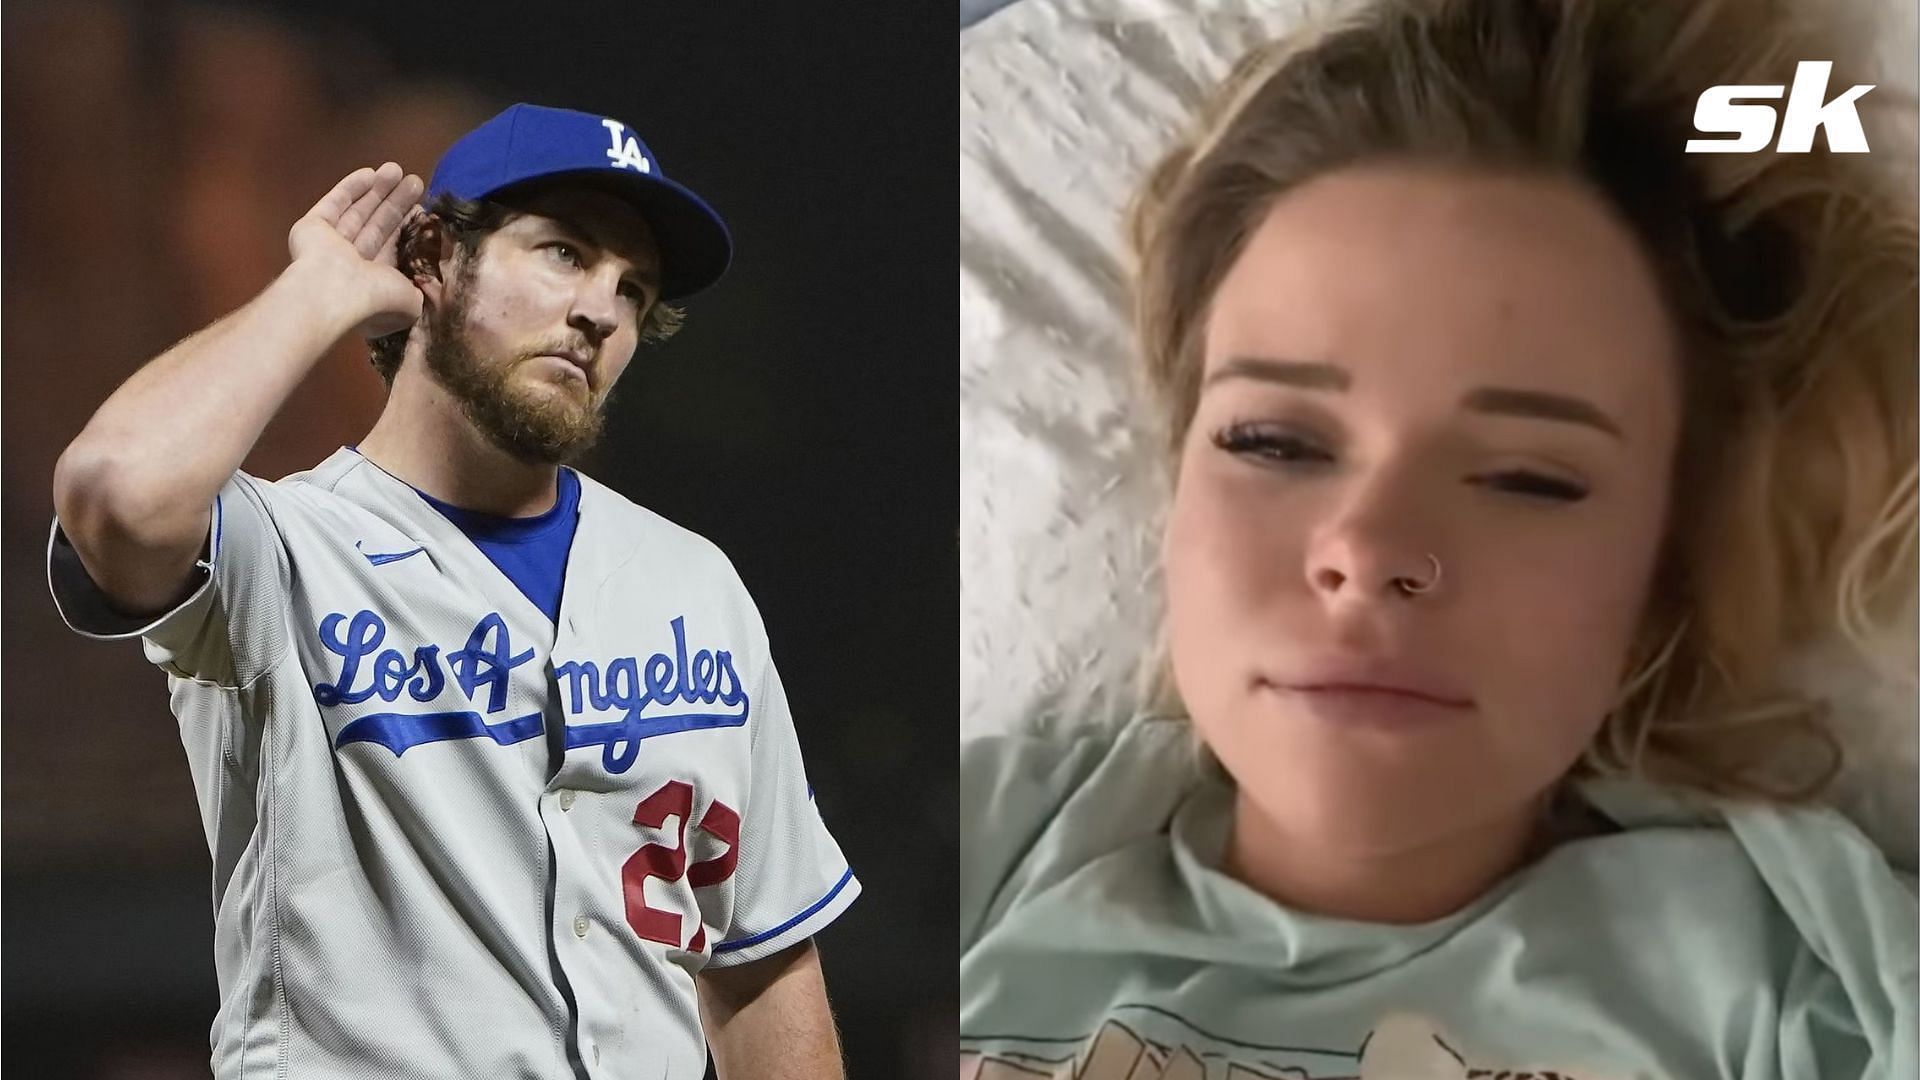 Lindsey Hill, who accused Trevor Bauer of sexually assaulting her, said she is working on her sobriety